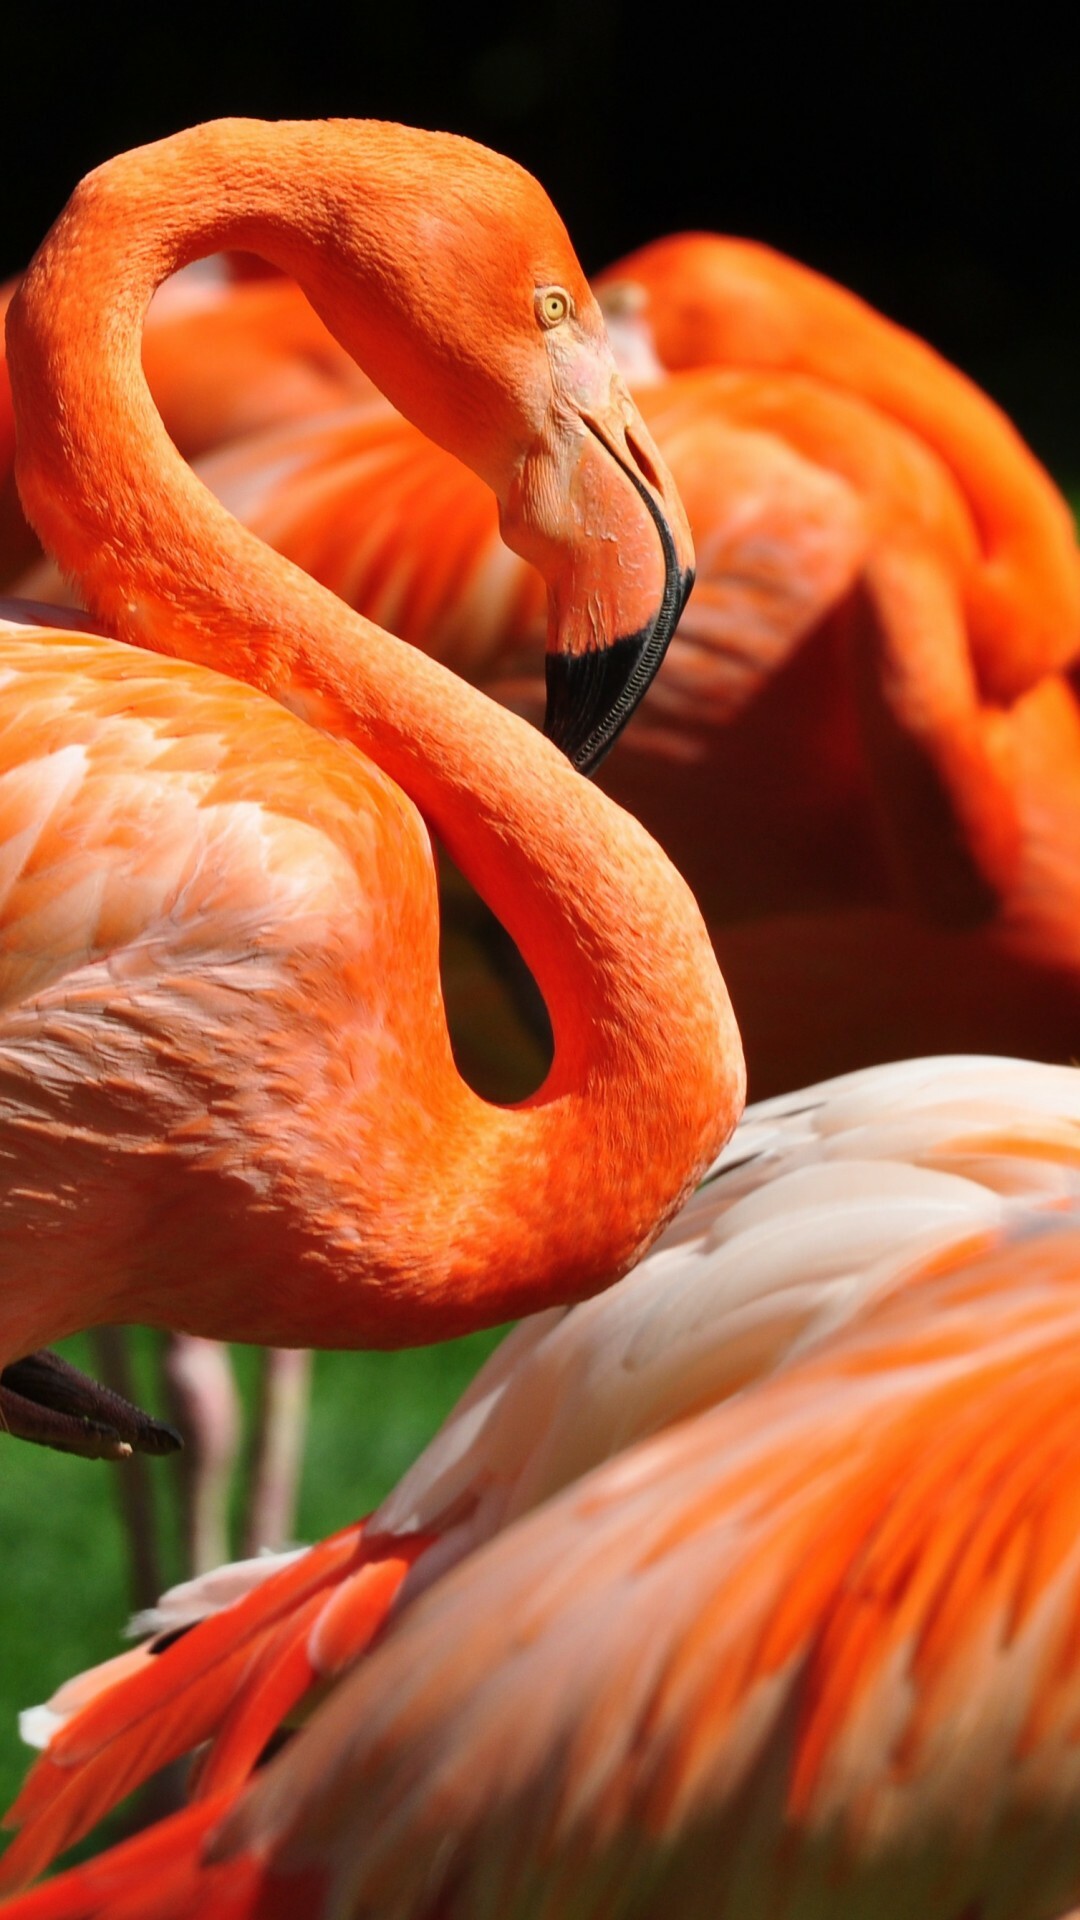 Flamingo: Phoenicopterus, One of the most recognized birds on the planet. 1080x1920 Full HD Background.